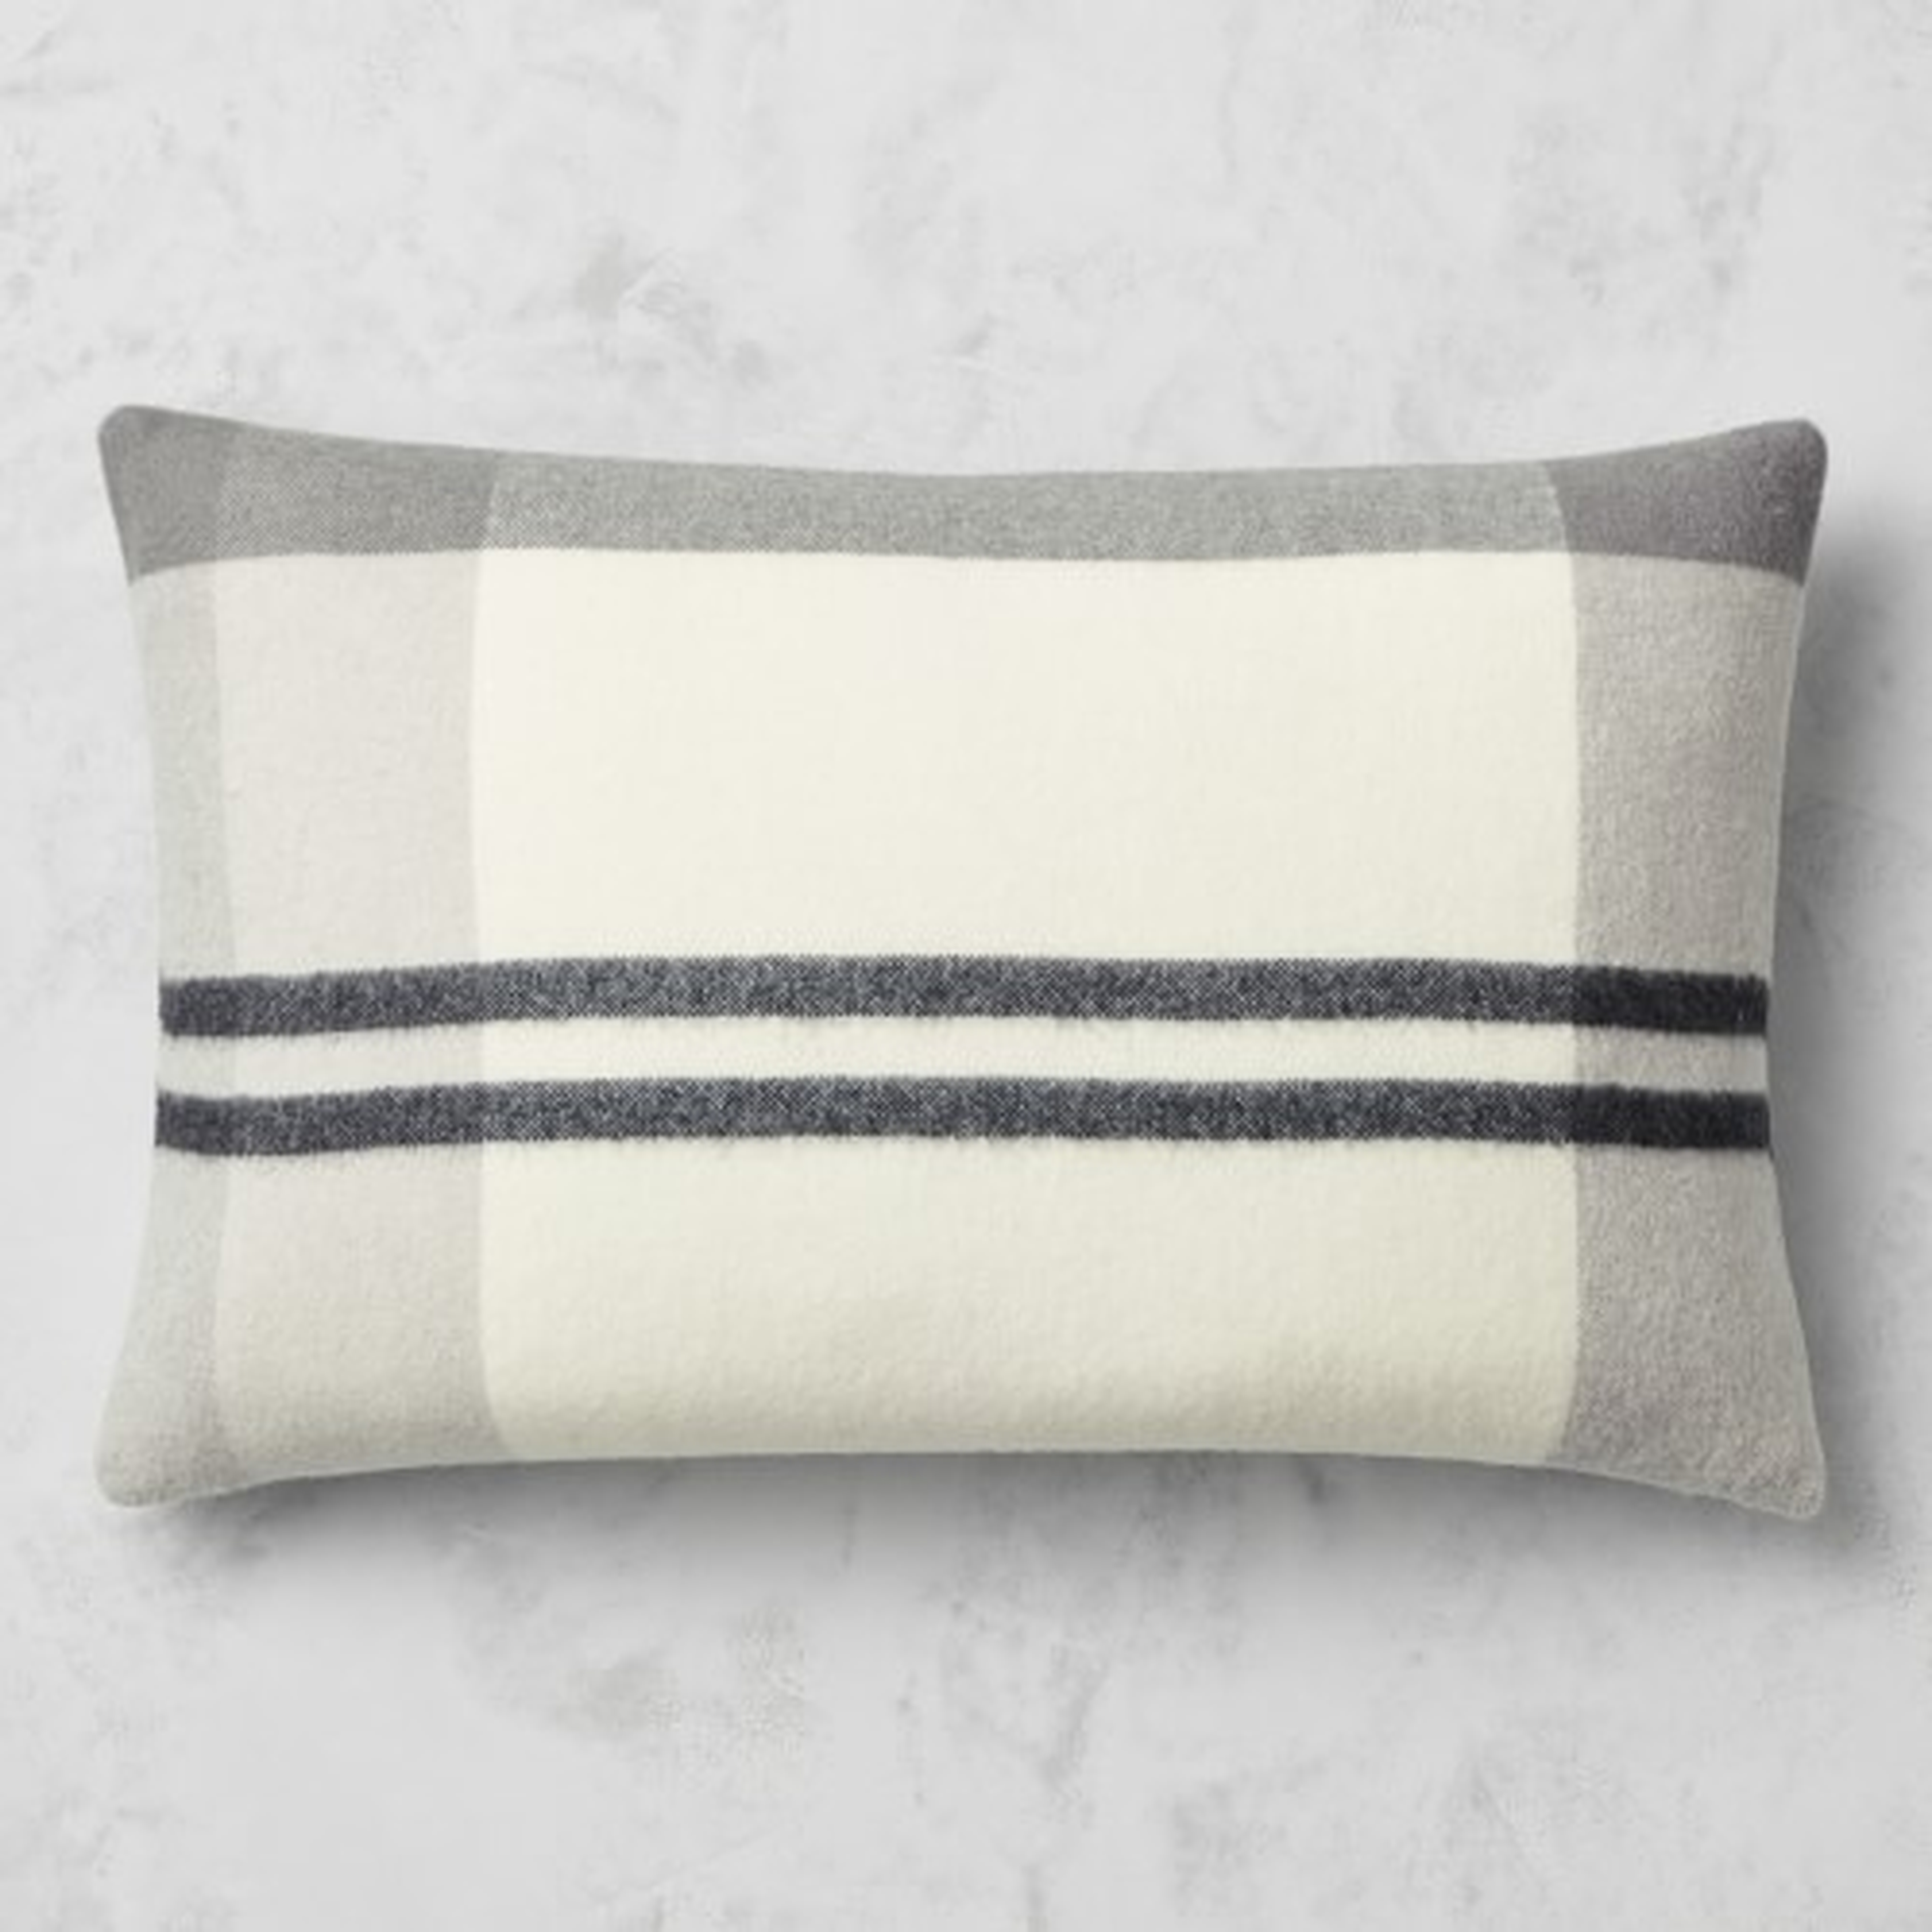 Plaid Lambswool Pillow Cover, 14" X 22", Grayson Black - Williams Sonoma